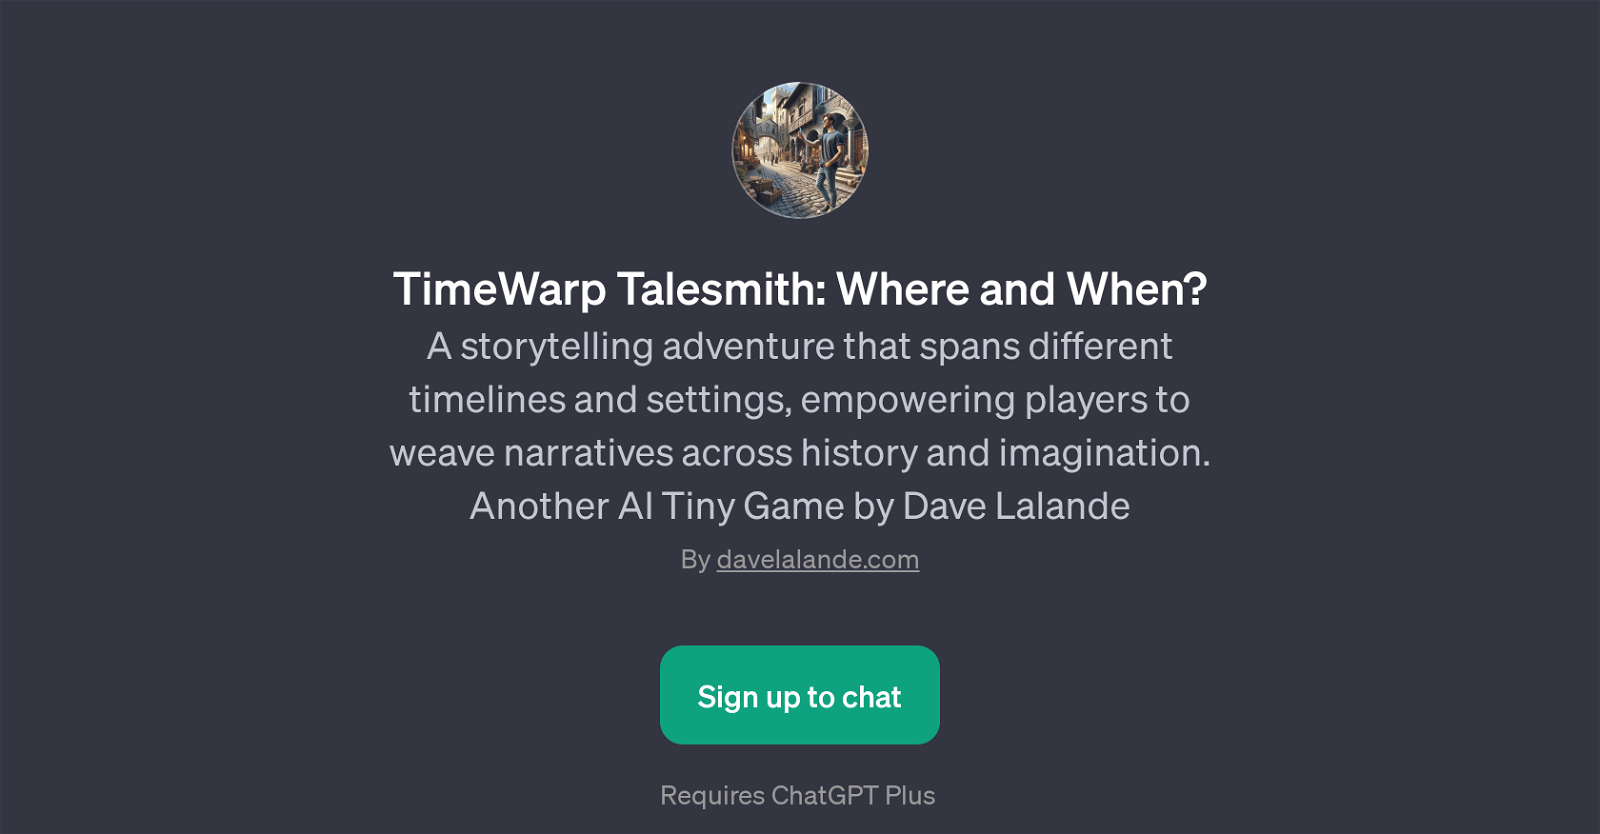 TimeWarp Talesmith: Where and When? website